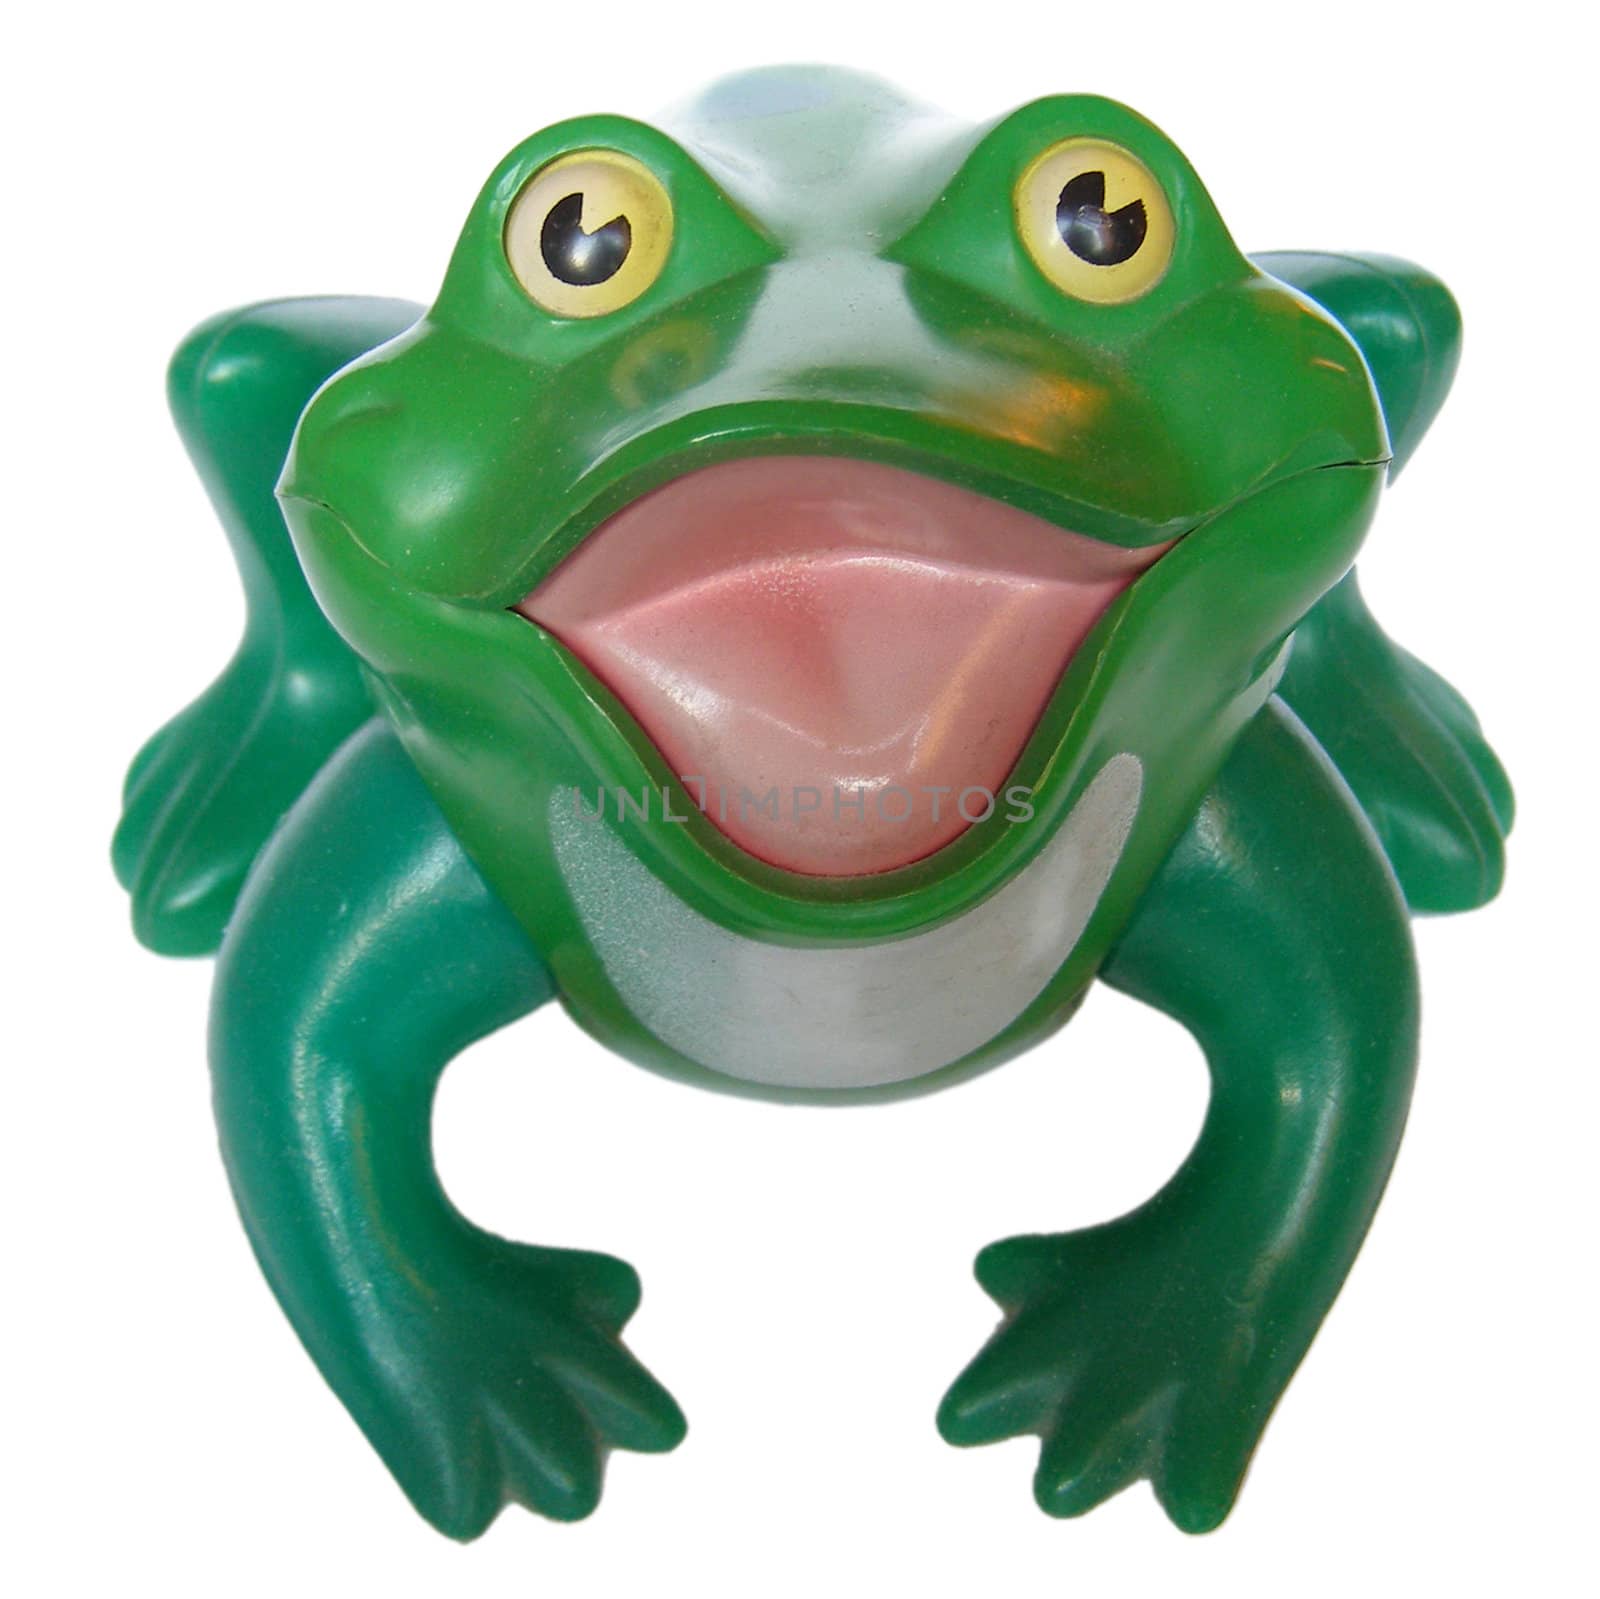 Green plastic toy frog